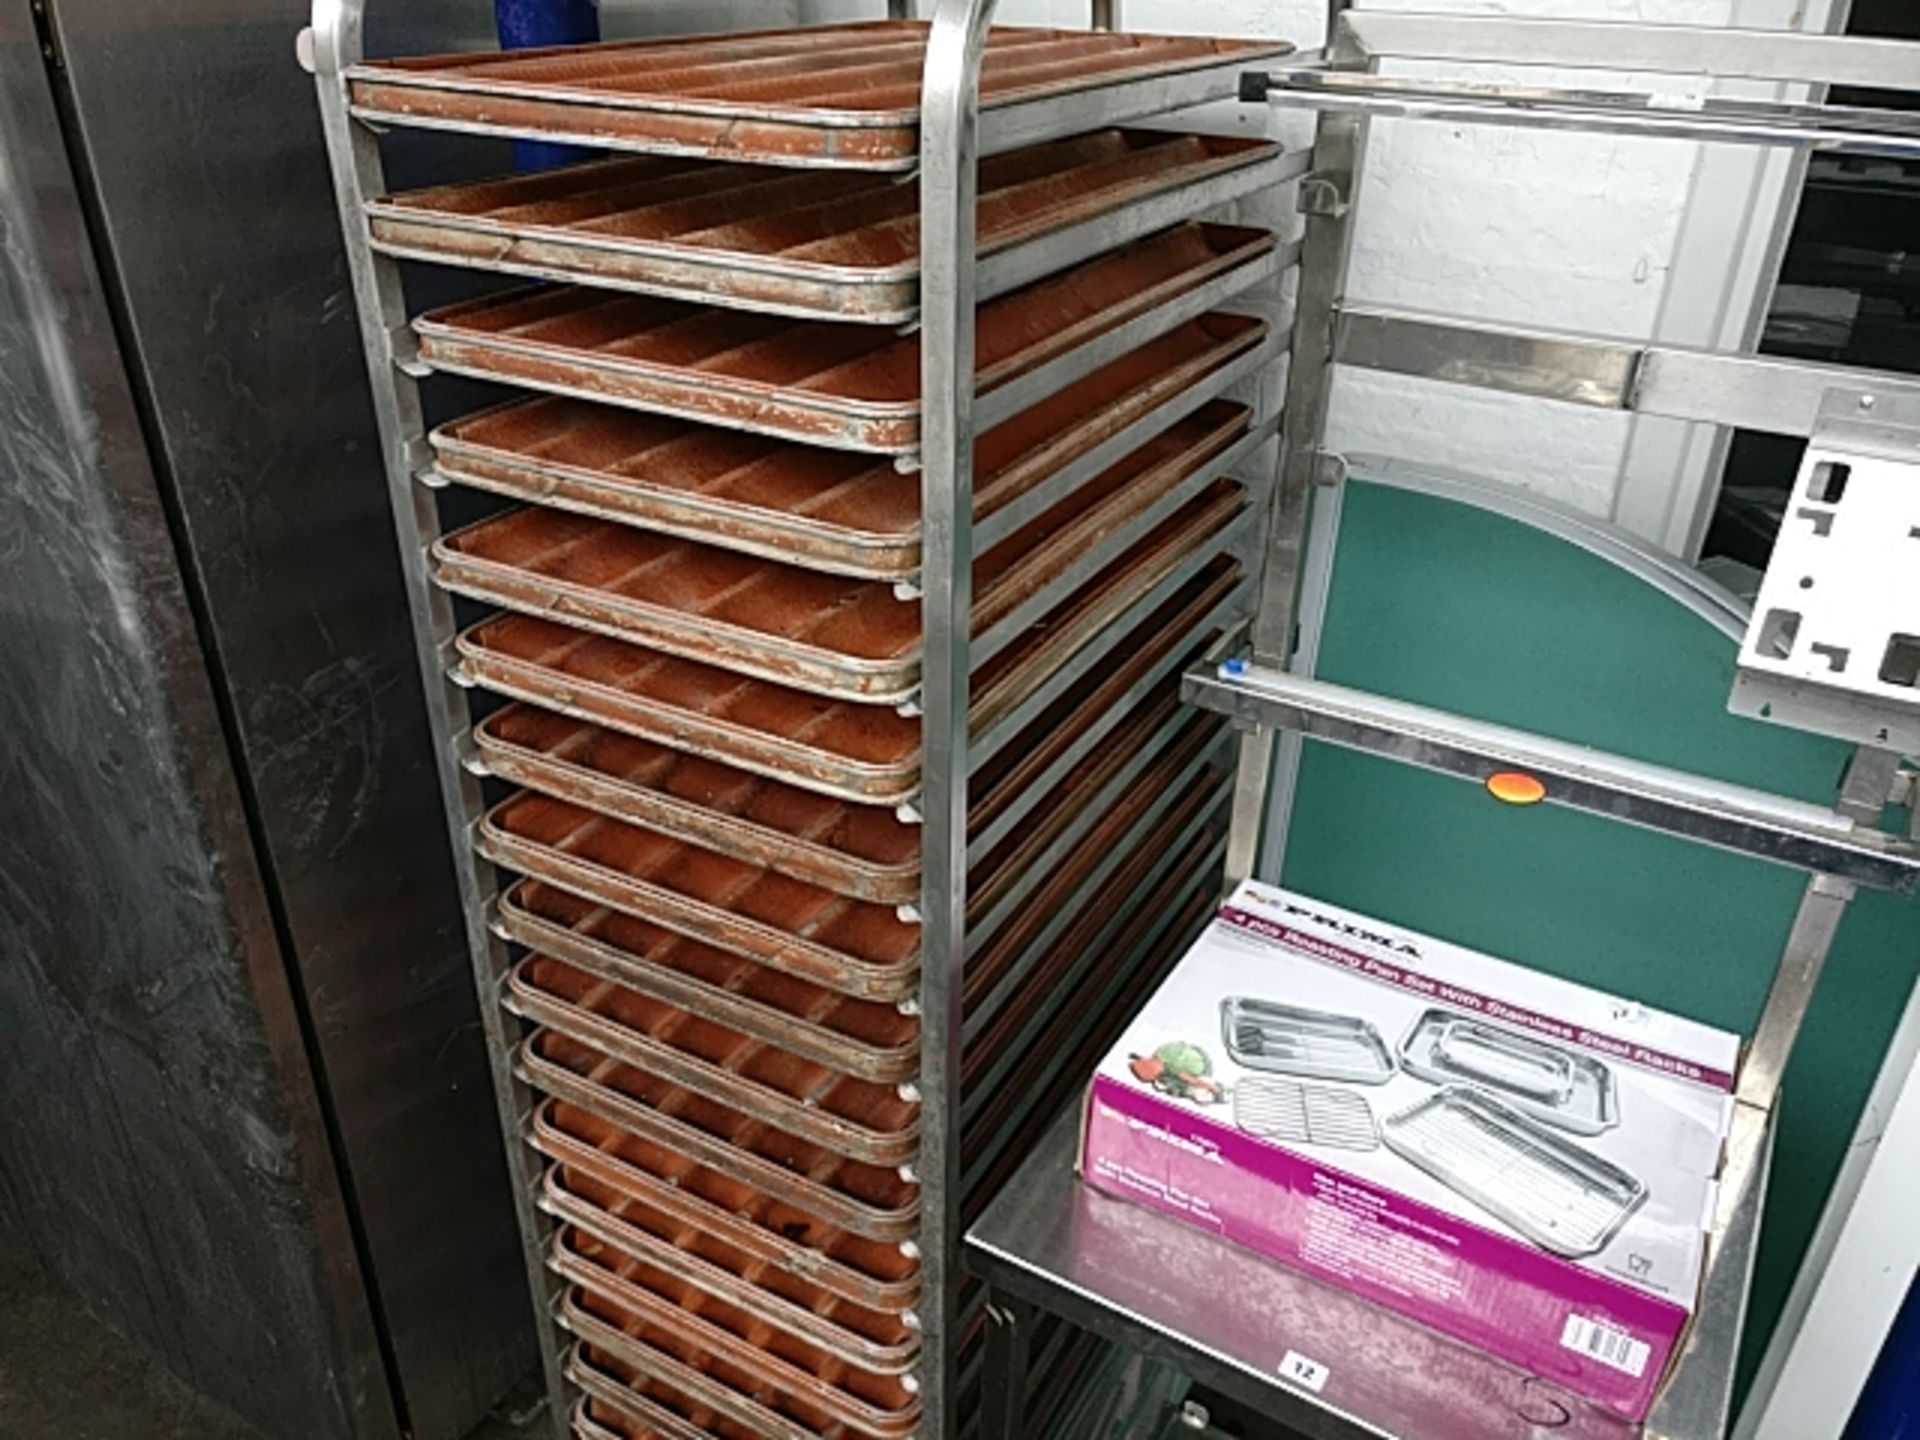 50cm wide baker's mobile trolley with trays